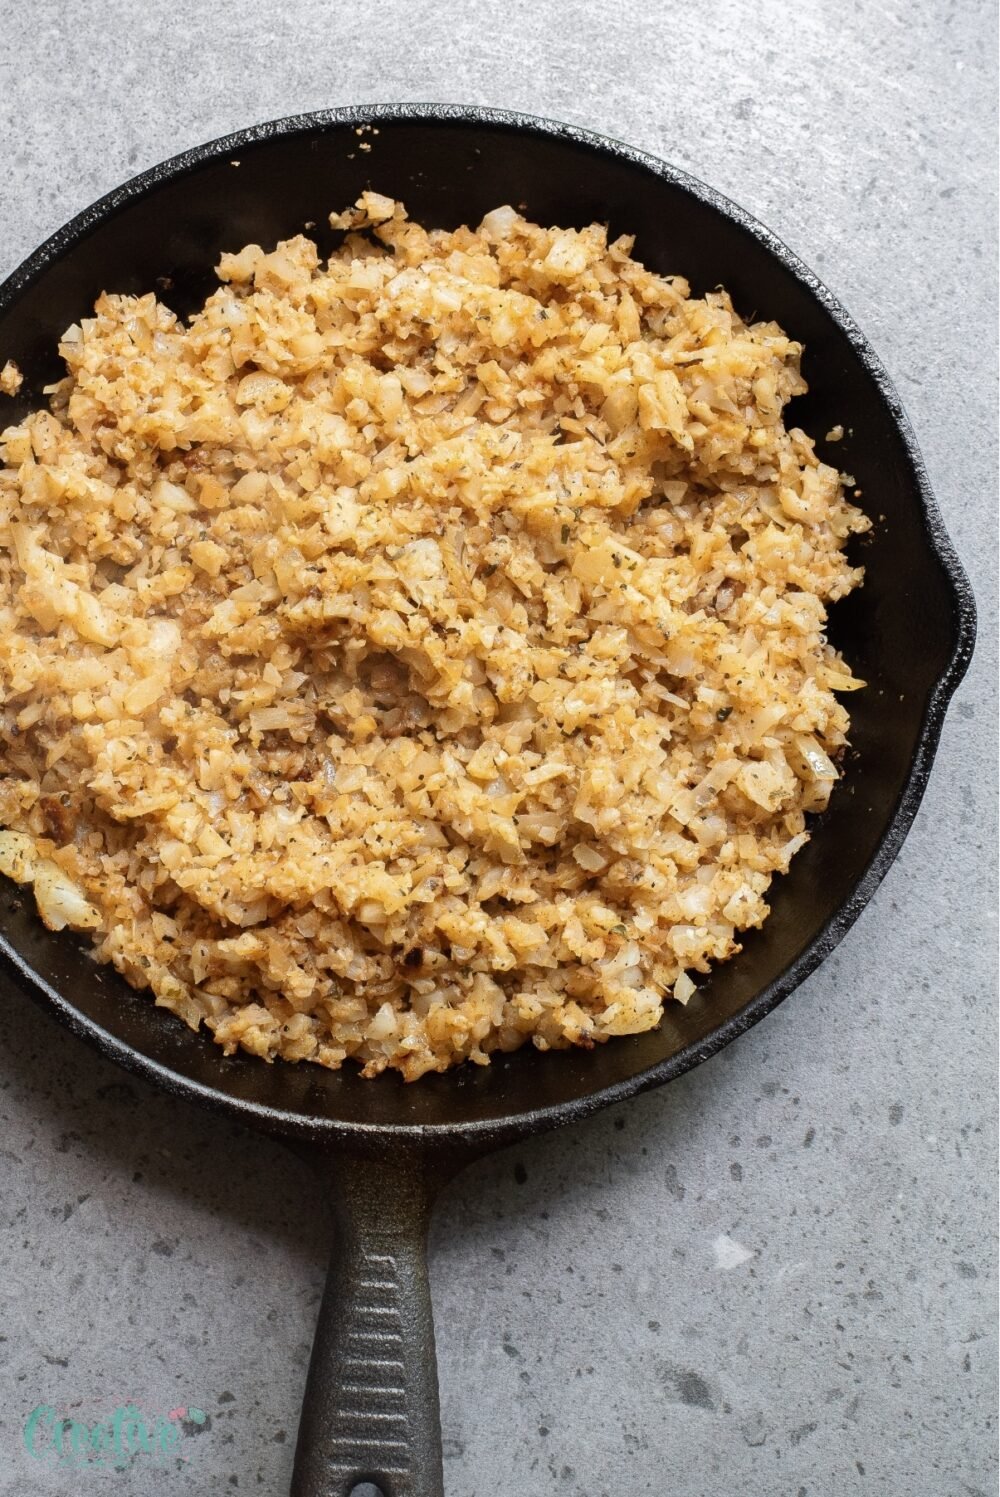 Garlic parm cauliflower rice is a go-to dish for many reasons.